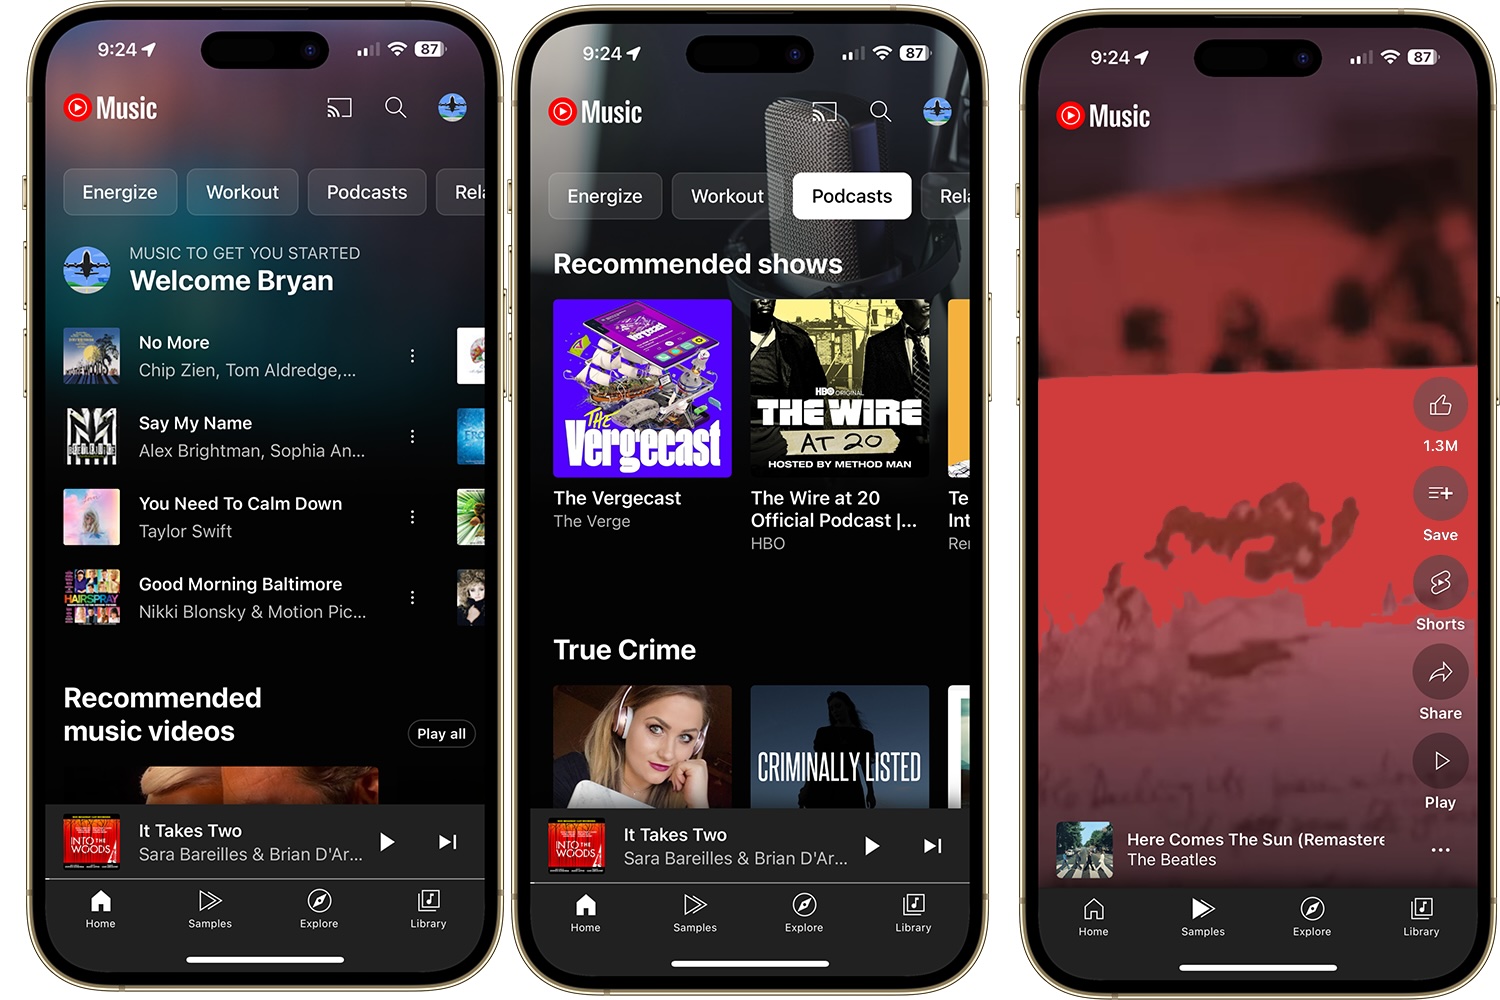 YouTube Music app as shown on an iPhone 15 Pro Max.